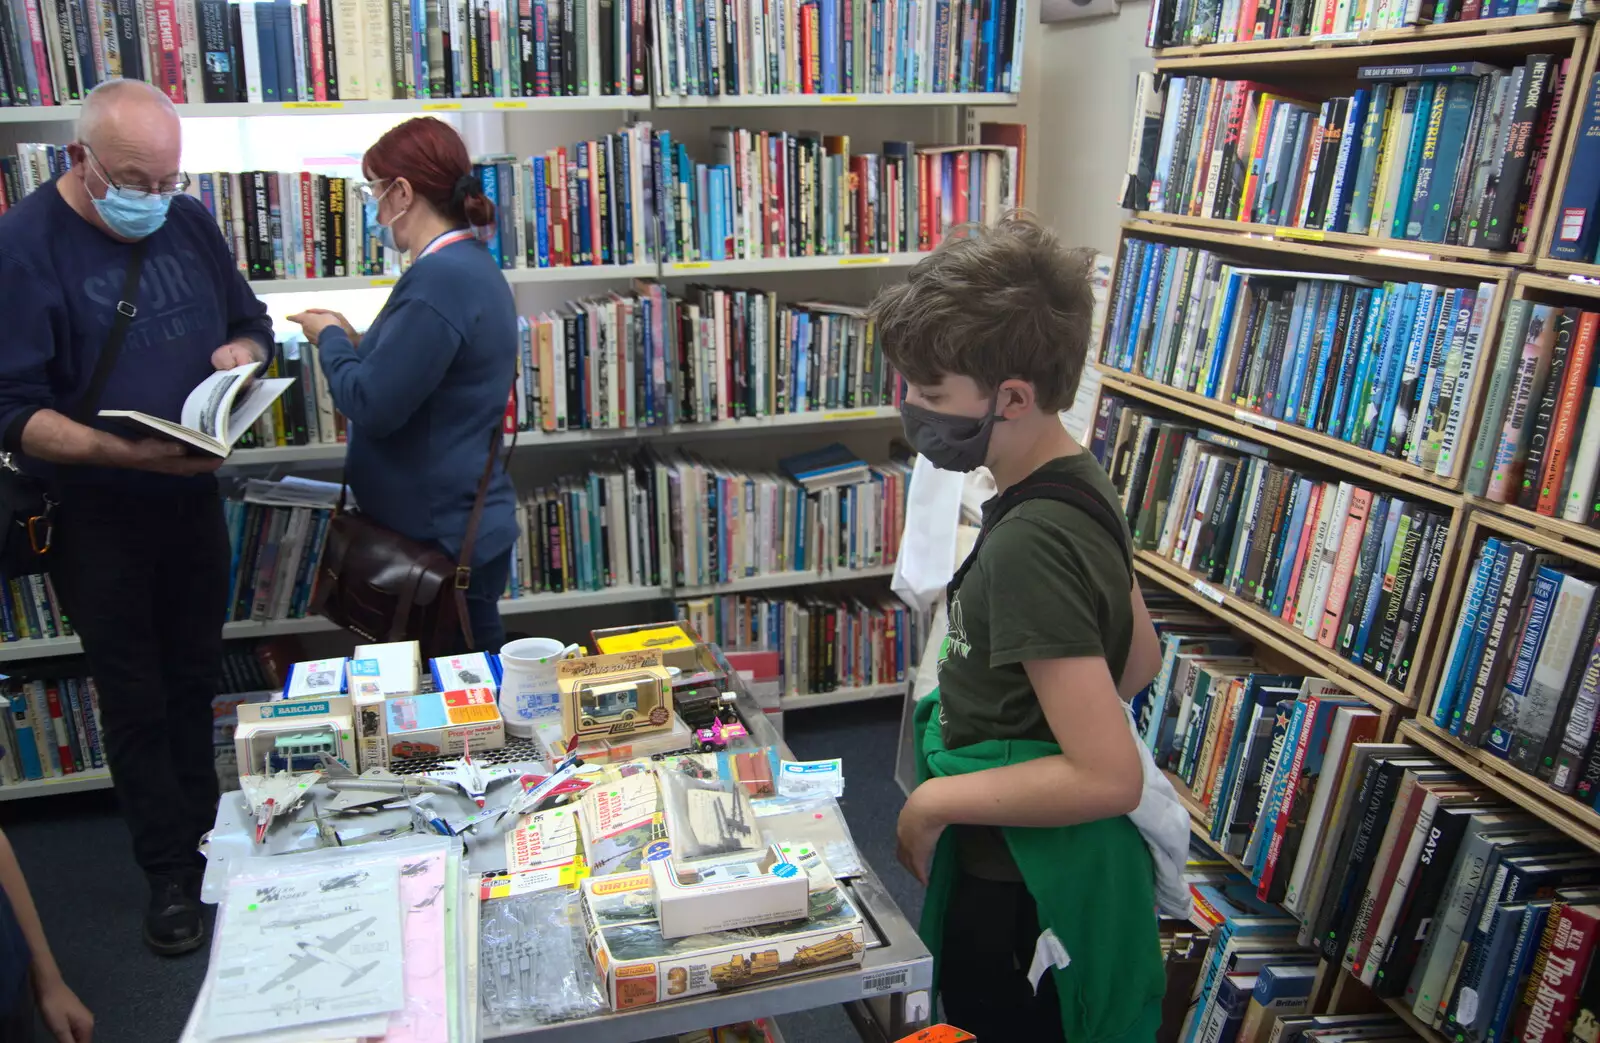 Fred pokes around in a book shop, from The Duxford Dash, IWM Duxford, Cambridge - 13th September 2020